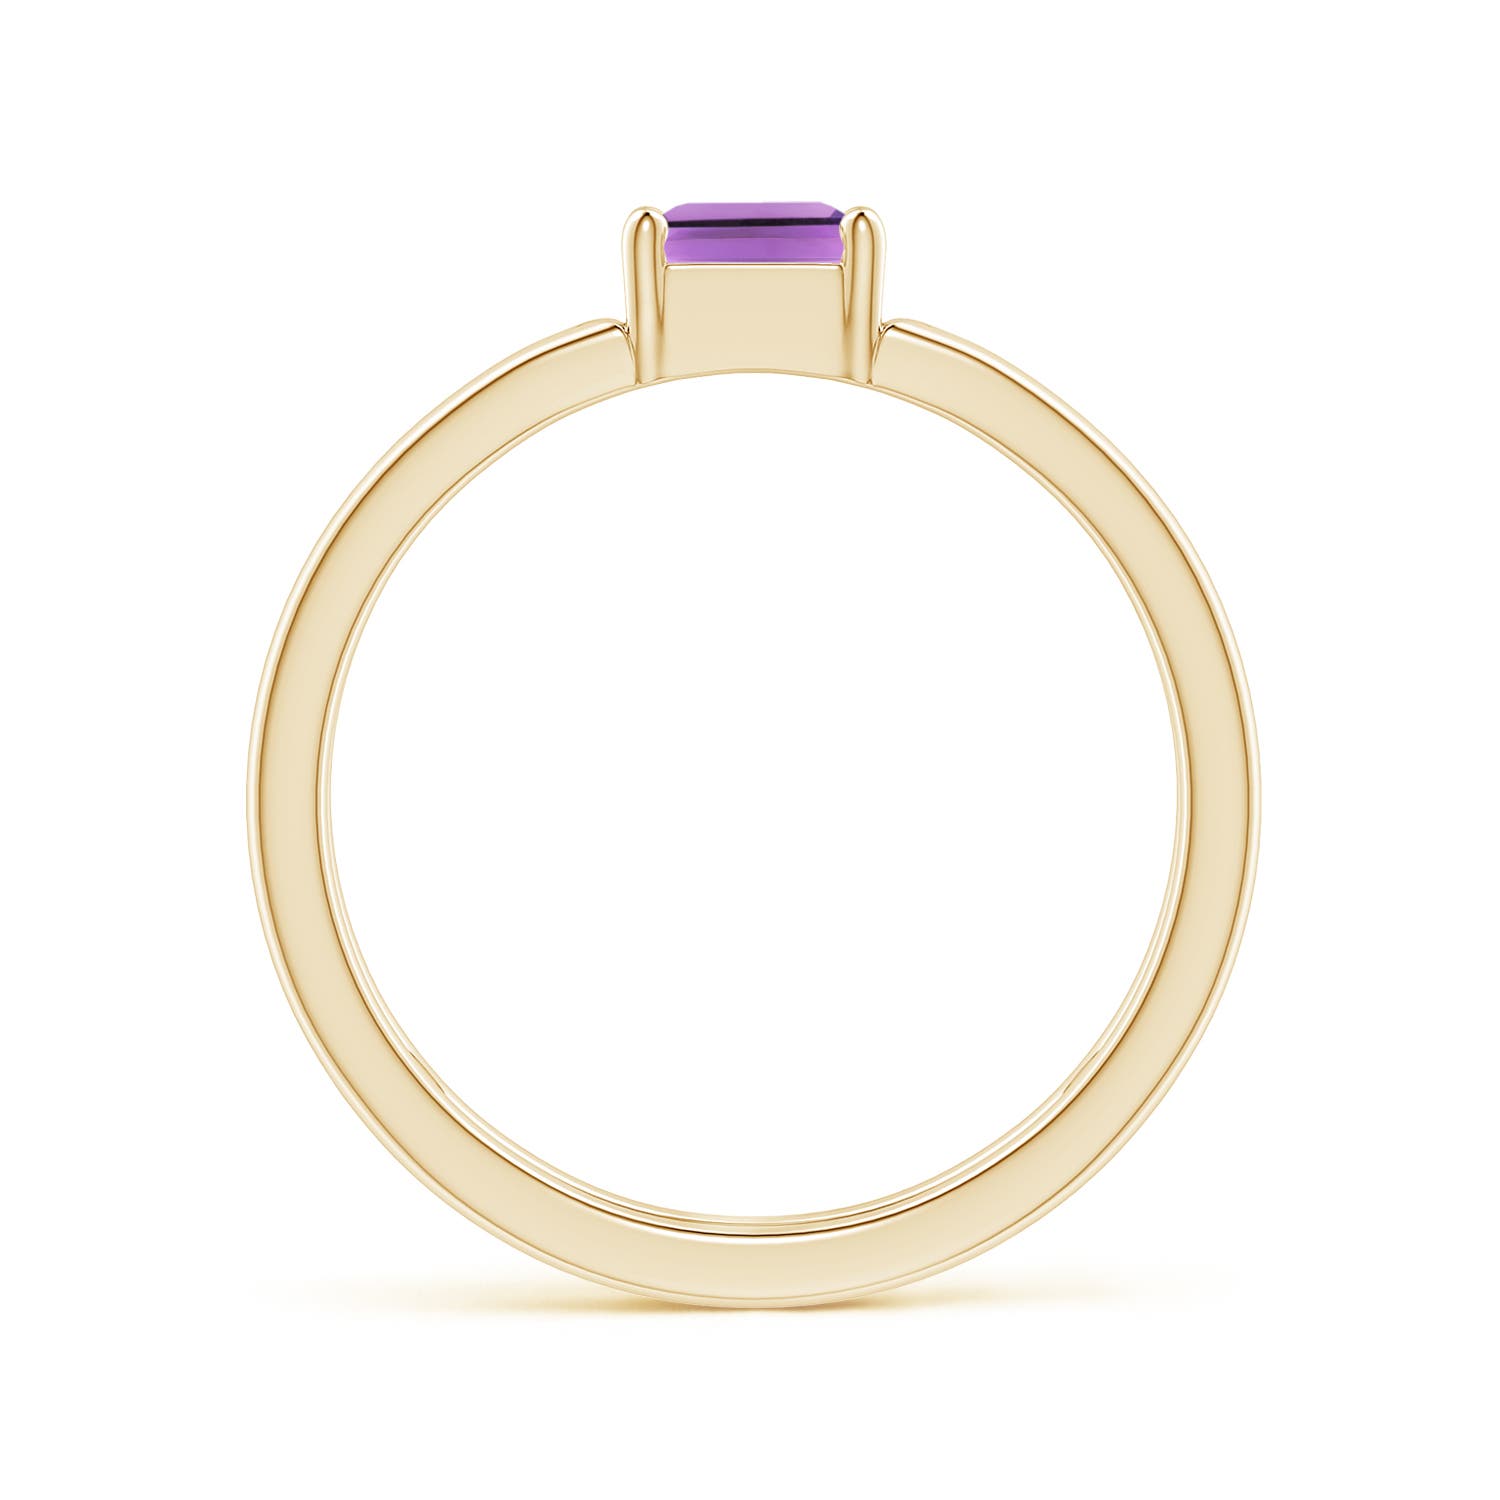 A - Amethyst / 0.7 CT / 14 KT Yellow Gold